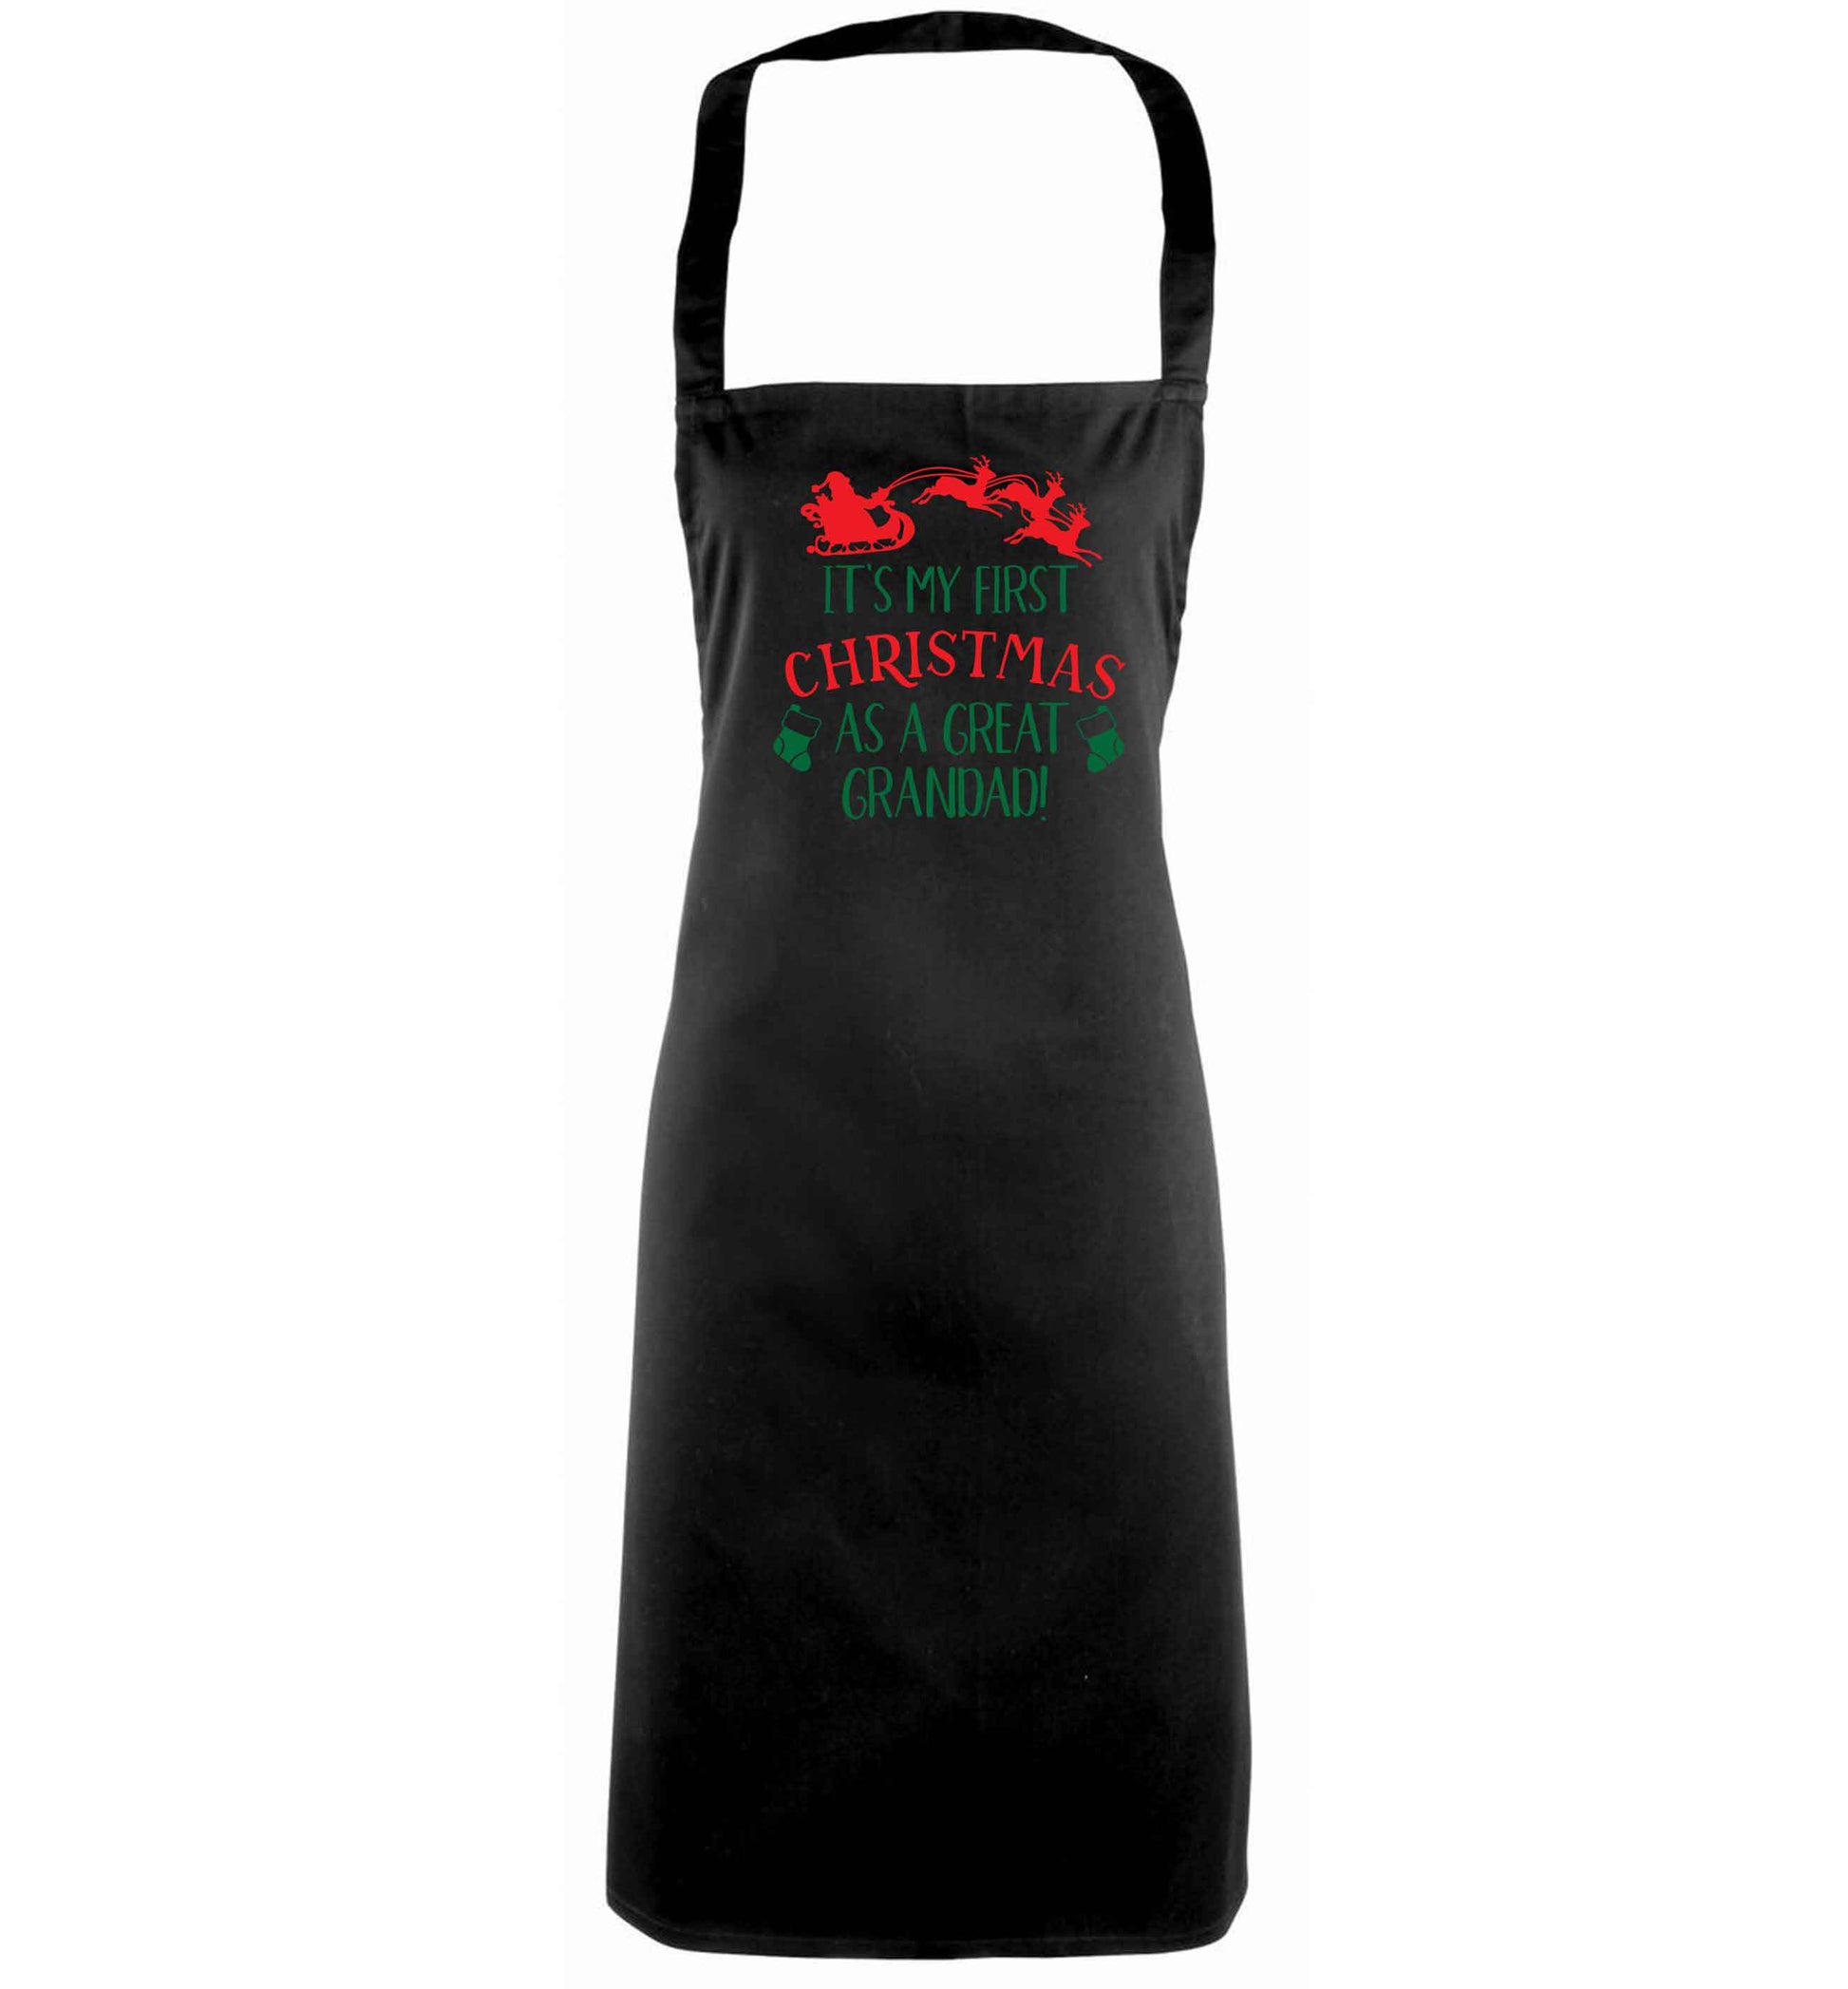 It's my first Christmas as a great grandad! black apron